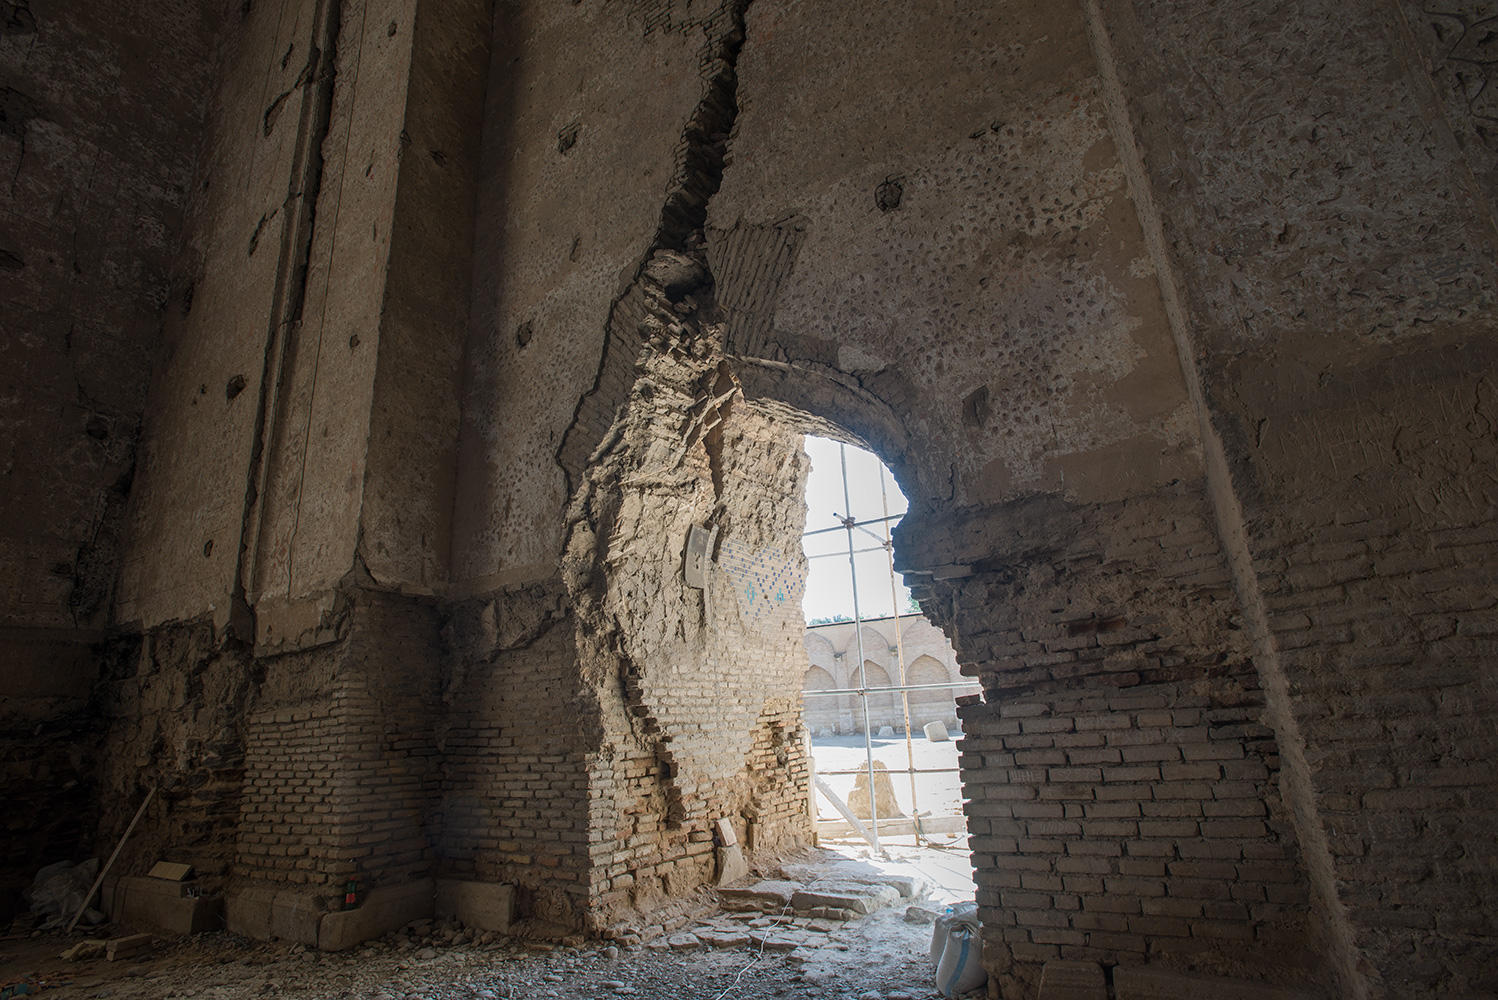 A side entrance to the mani iwan or prayer hall, showing earthquake damage and the challenge facing the restorers of this enormous edifice.